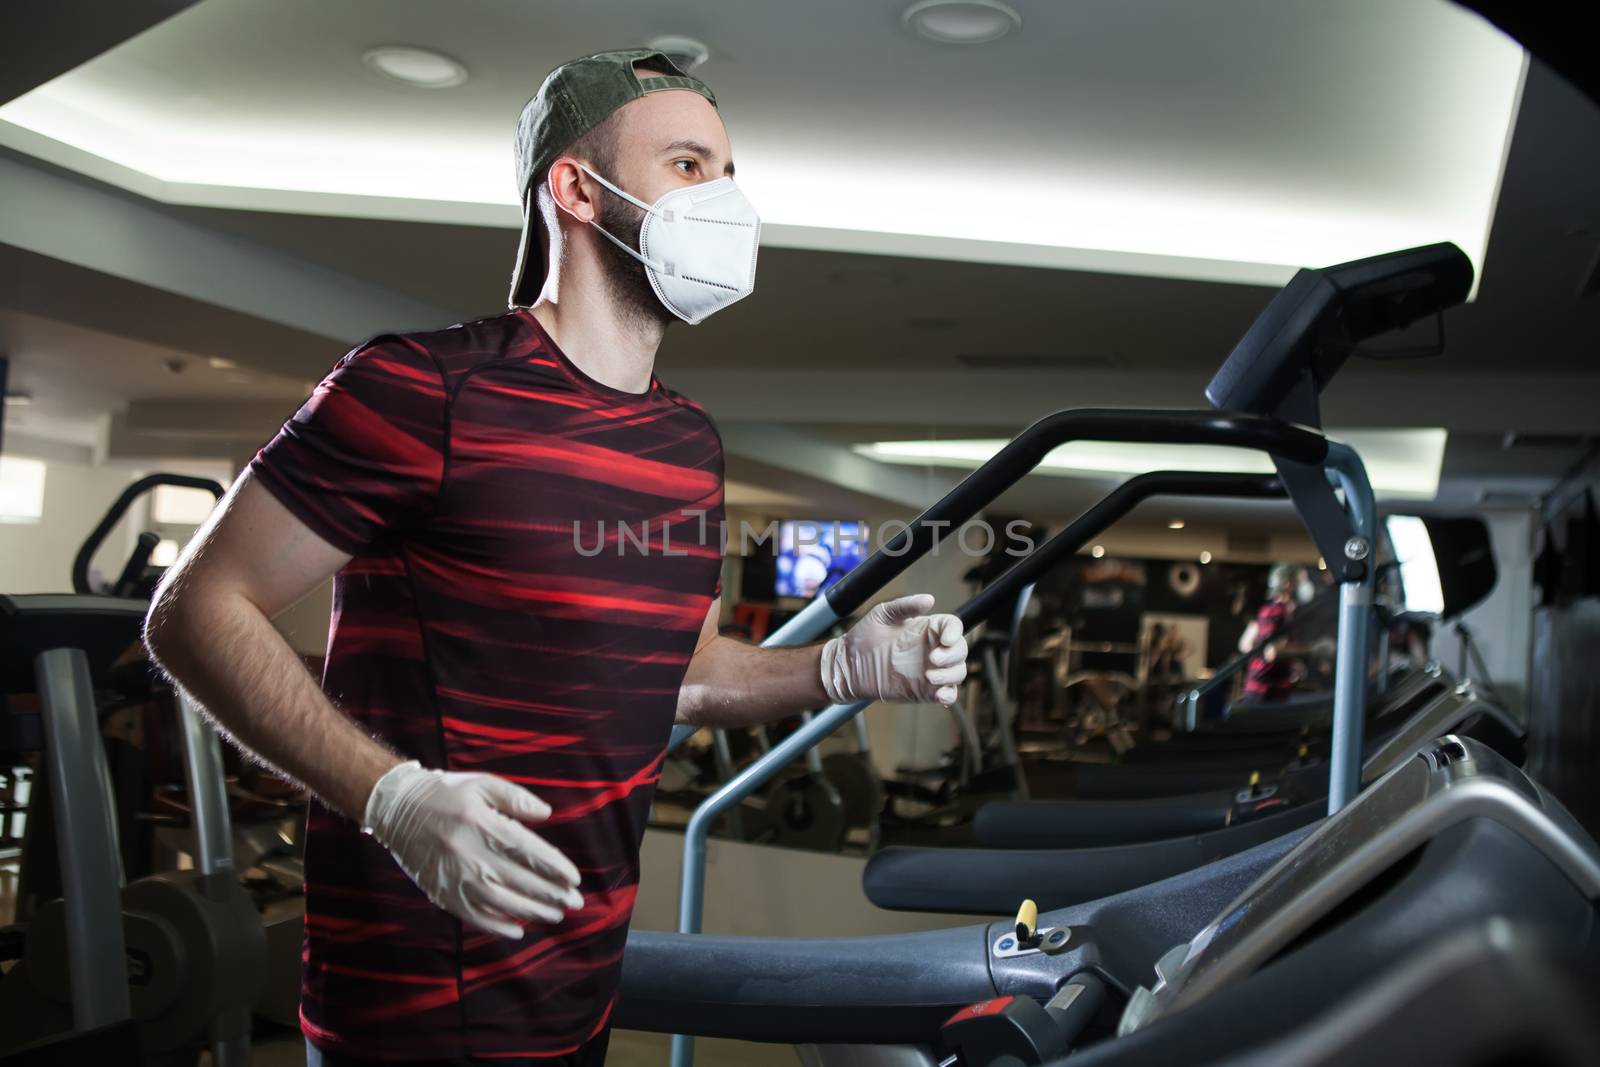 Young man running on treadmill in indoor gym,wearing protective face mask & rubber latex gloves,COVID-19 pandemic prevention of spread & transfer of Coronavirus,staying fit in lockdown concept in US